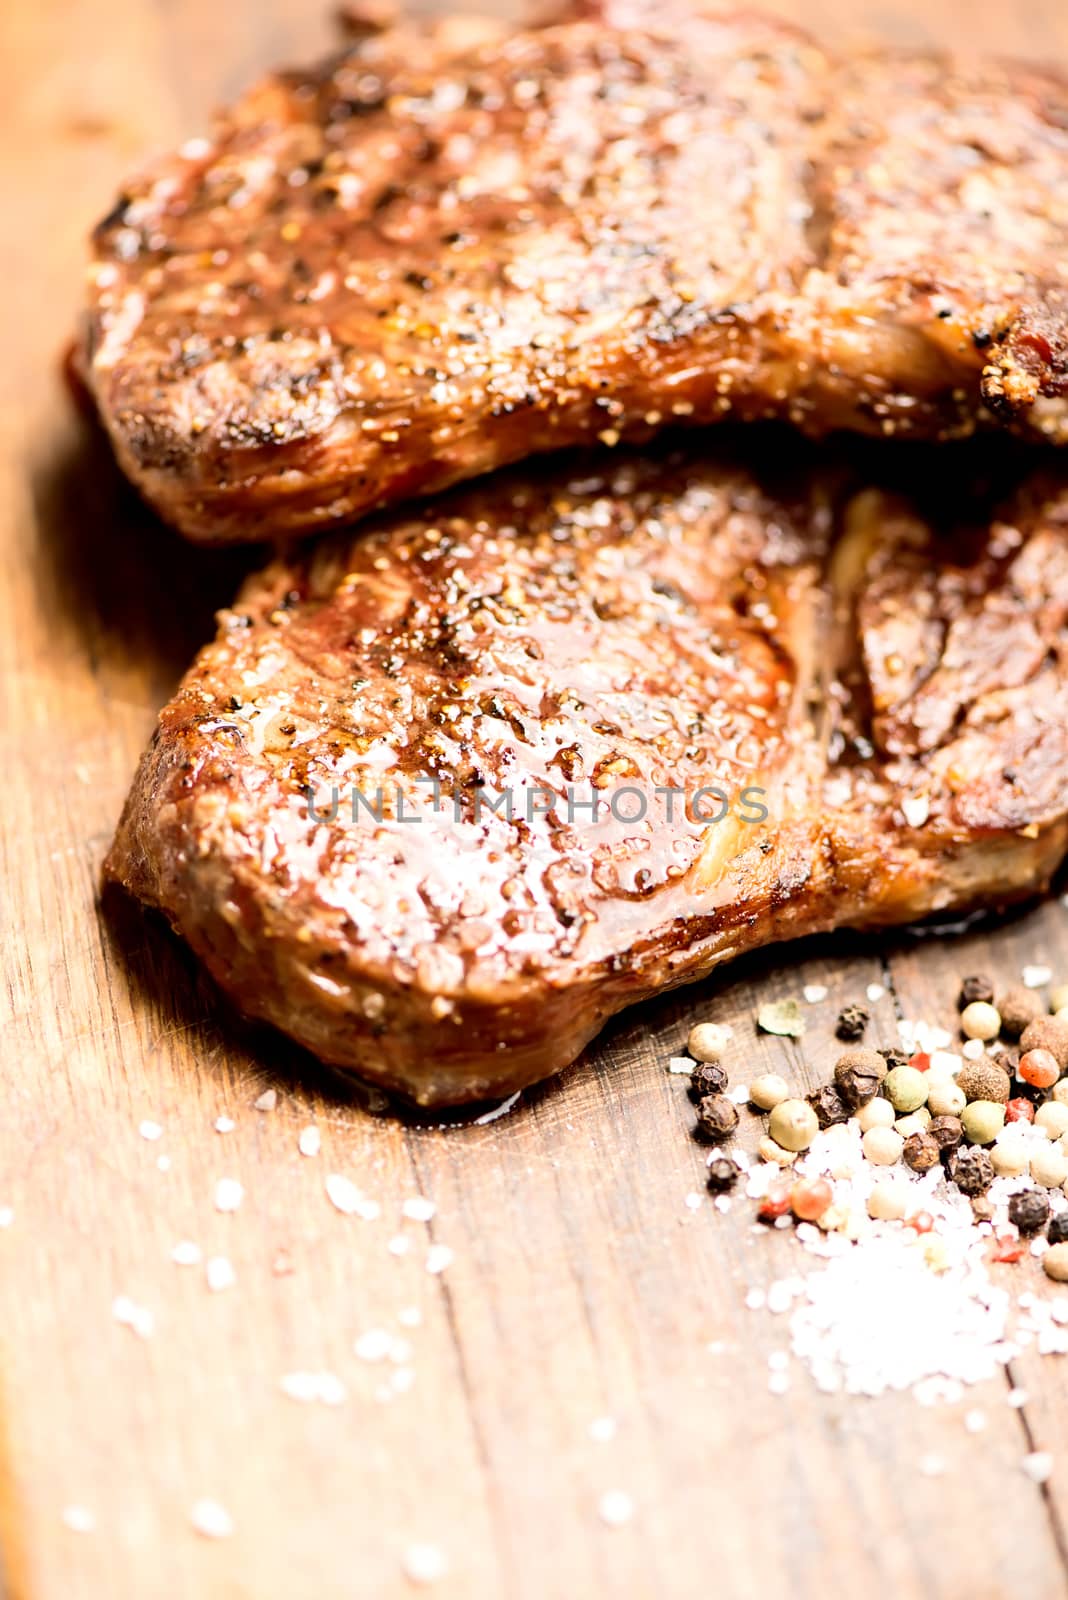 grilled steaks on an old wooden board with pepper by Nanisimova